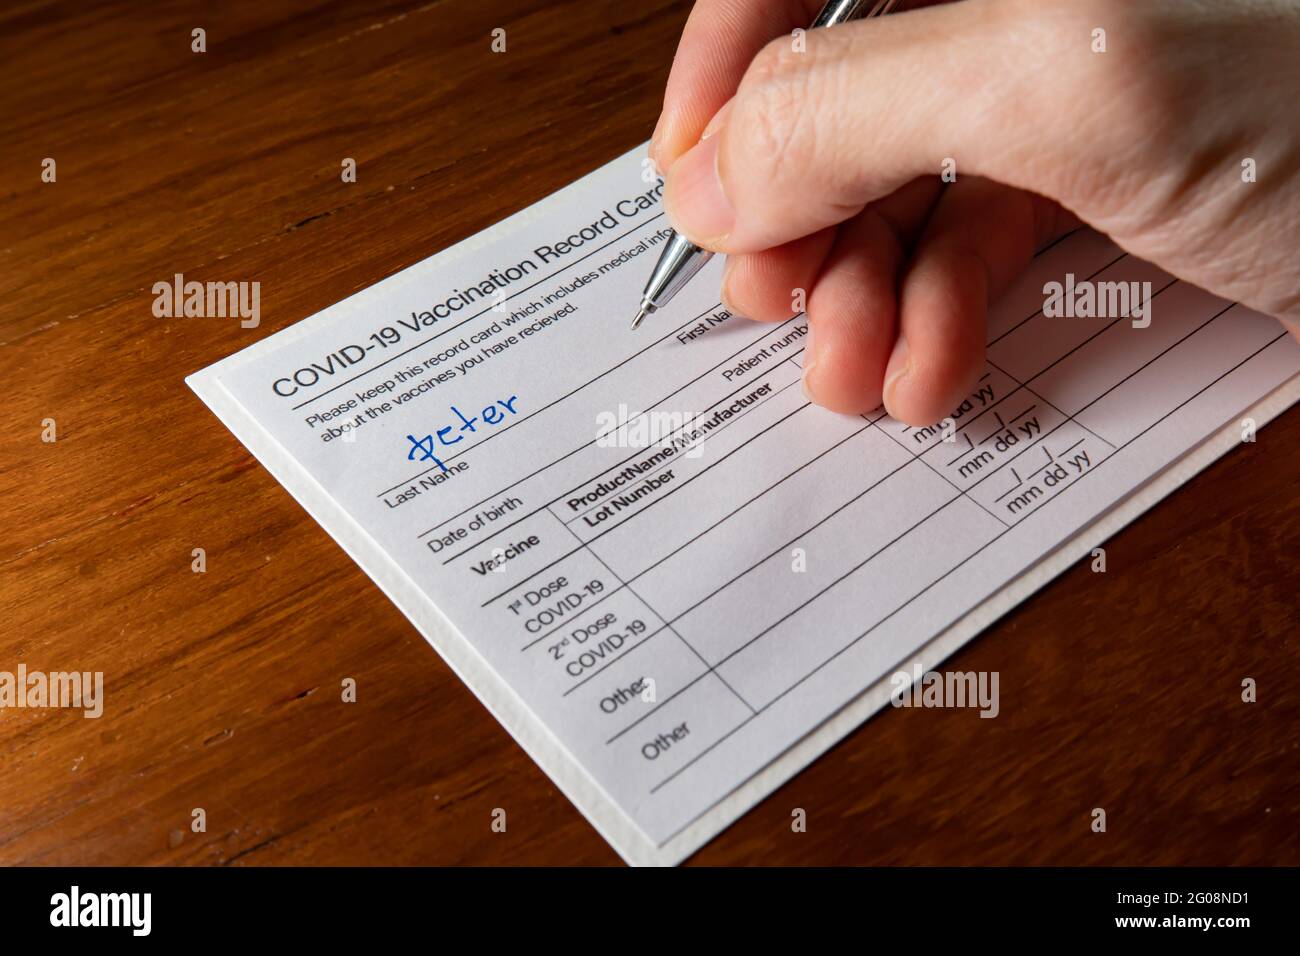 Writing a name on a Covid-19 vaccination record card Stock Photo